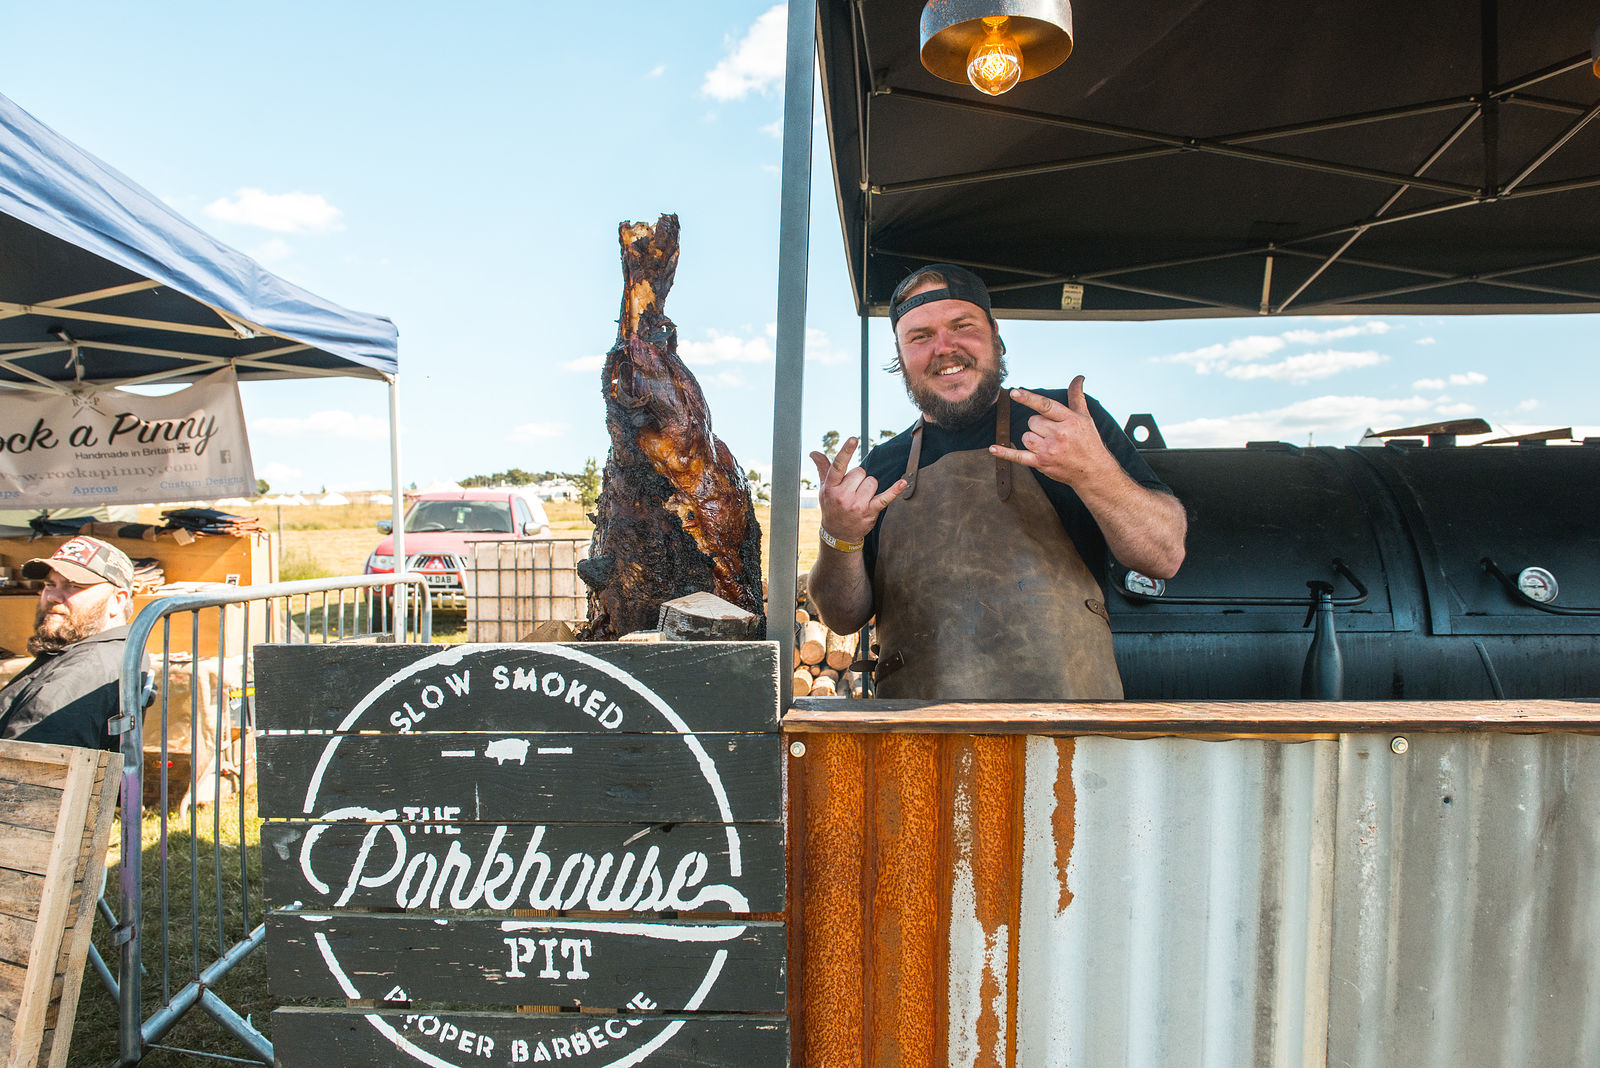 The Porkhouse Pit